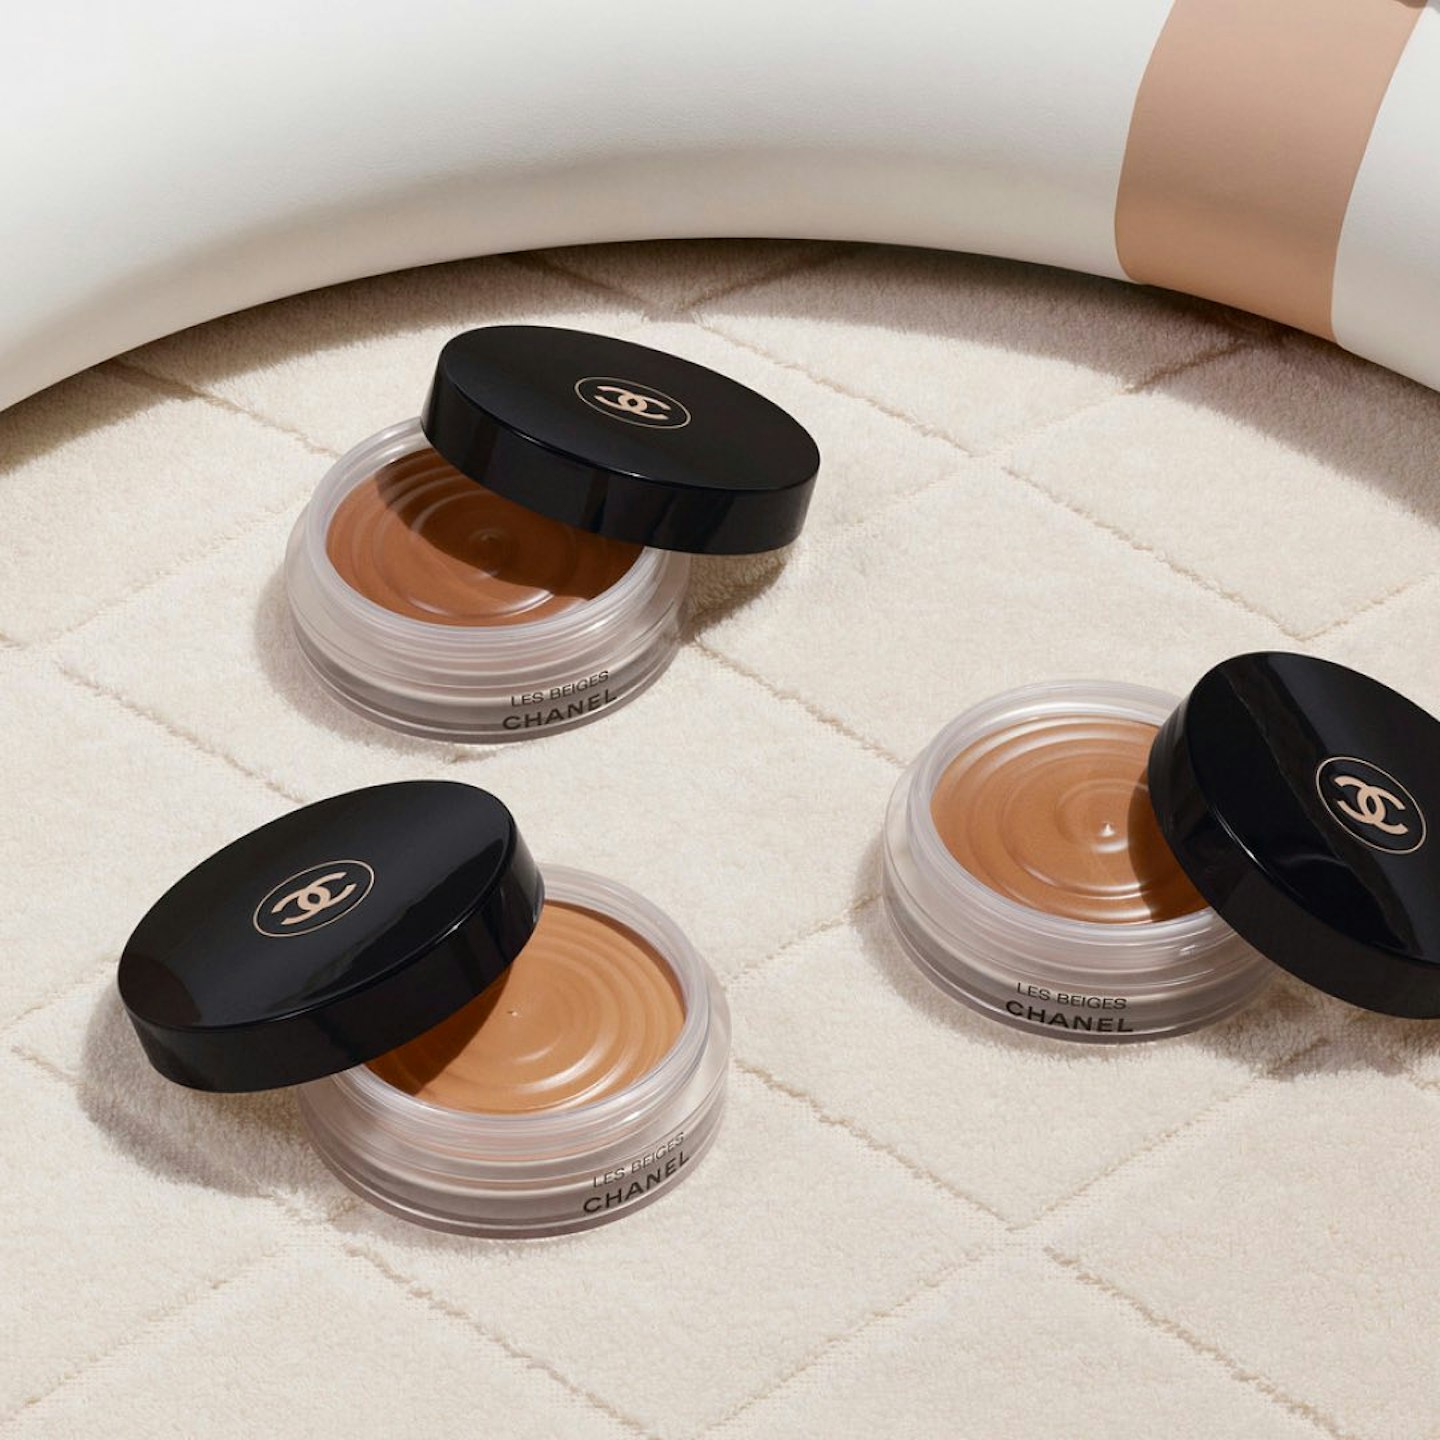 Chanel Les Beiges Bronzing Cream: Is It Really Worth The Hype?